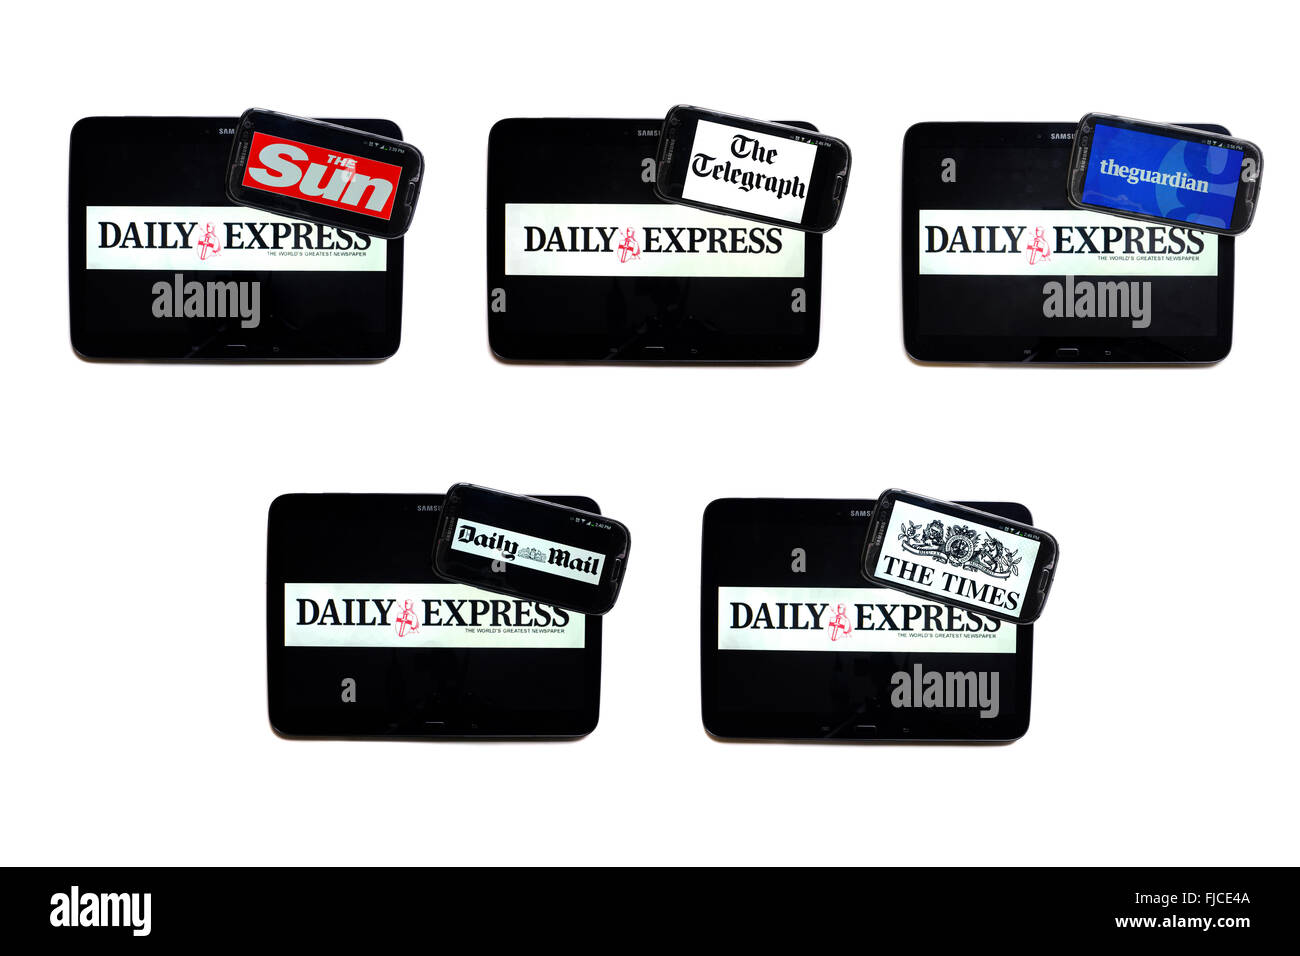 The Daily Express newspaper logo on tablet screens surrounded by smartphones displaying the logos of rival newspapers. Stock Photo